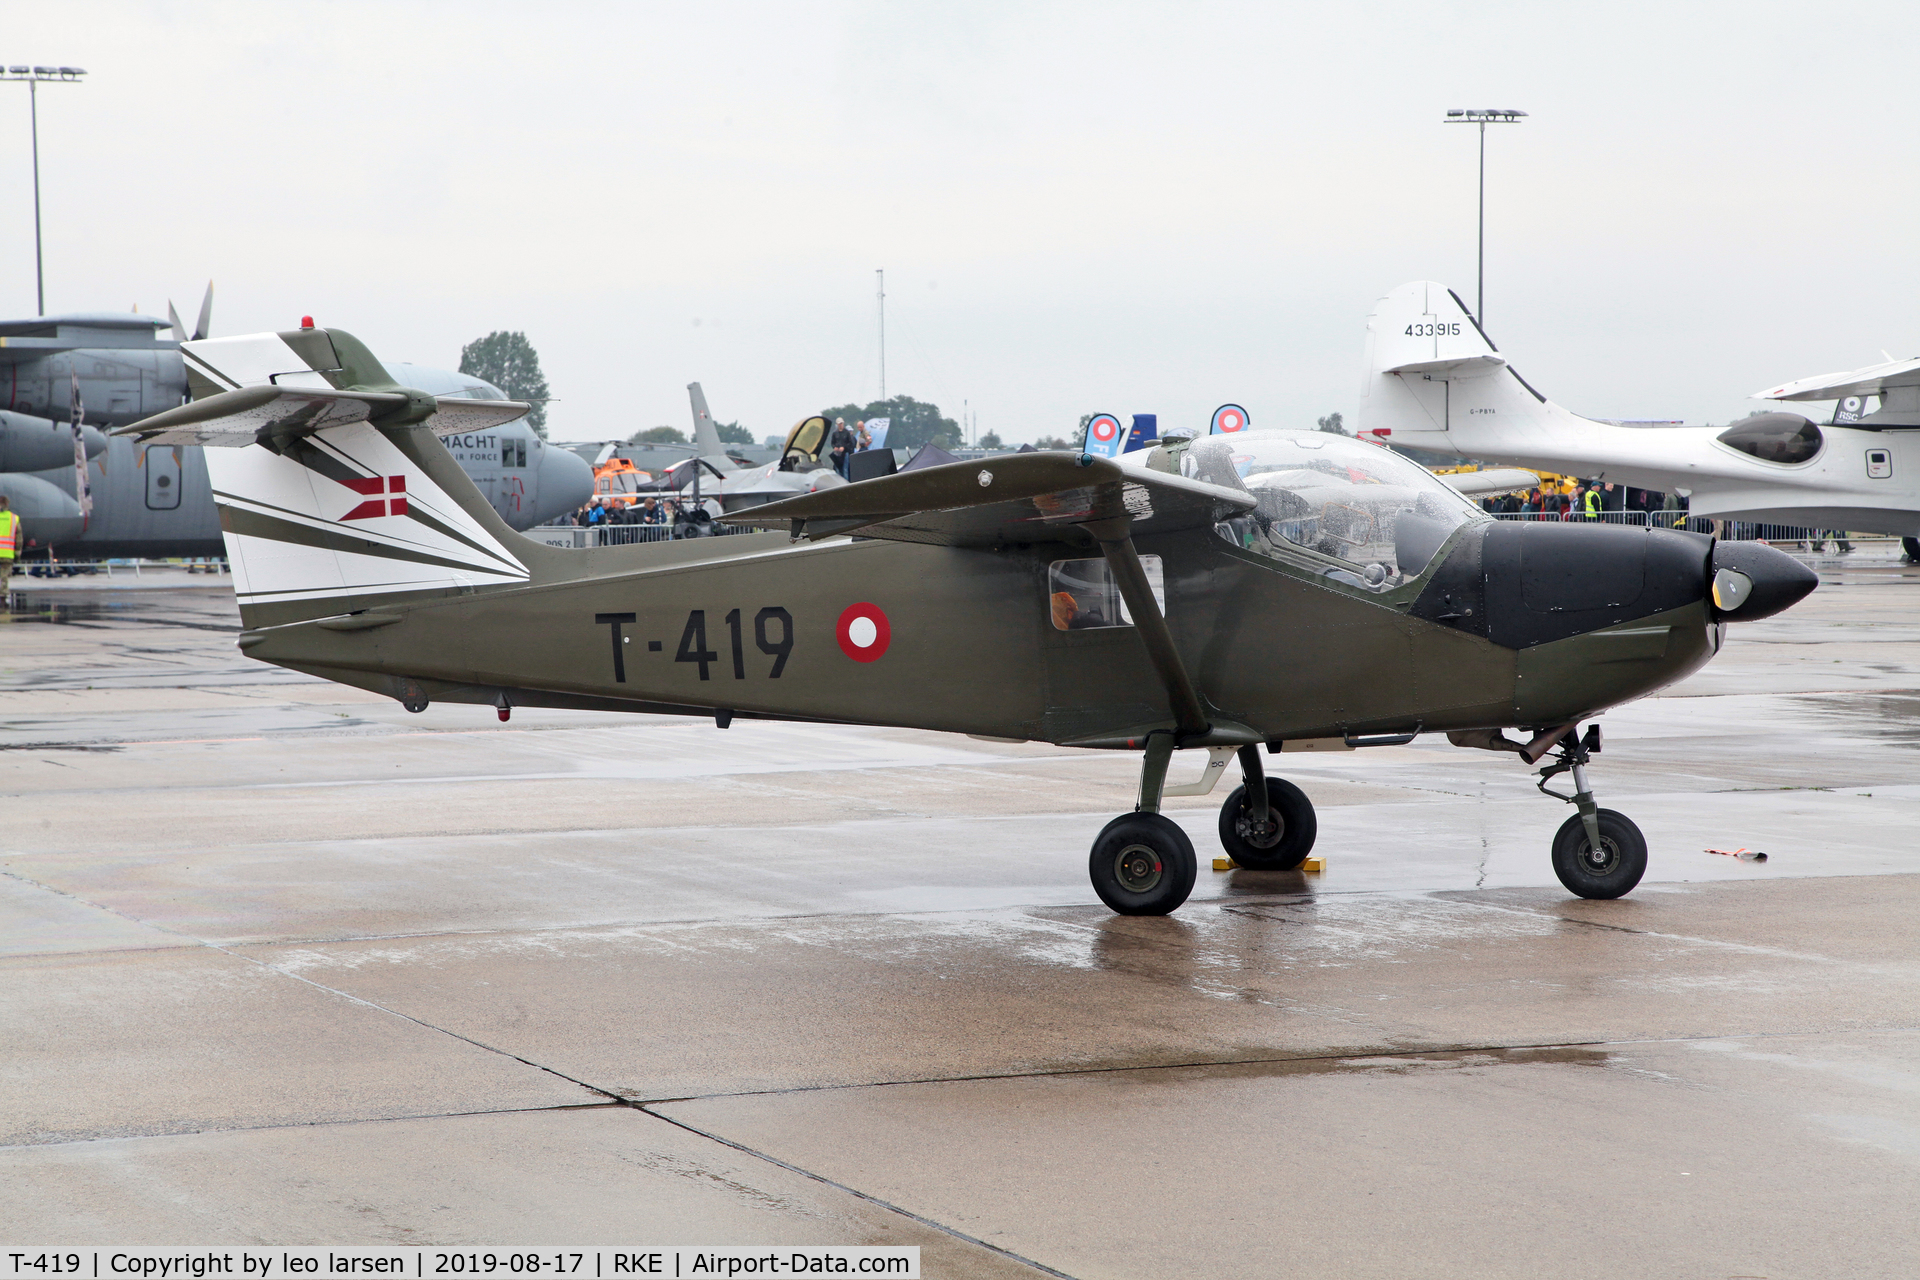 T-419, Saab T-17 Supporter C/N 15-219, Roskilde Air Show 17.8.2019